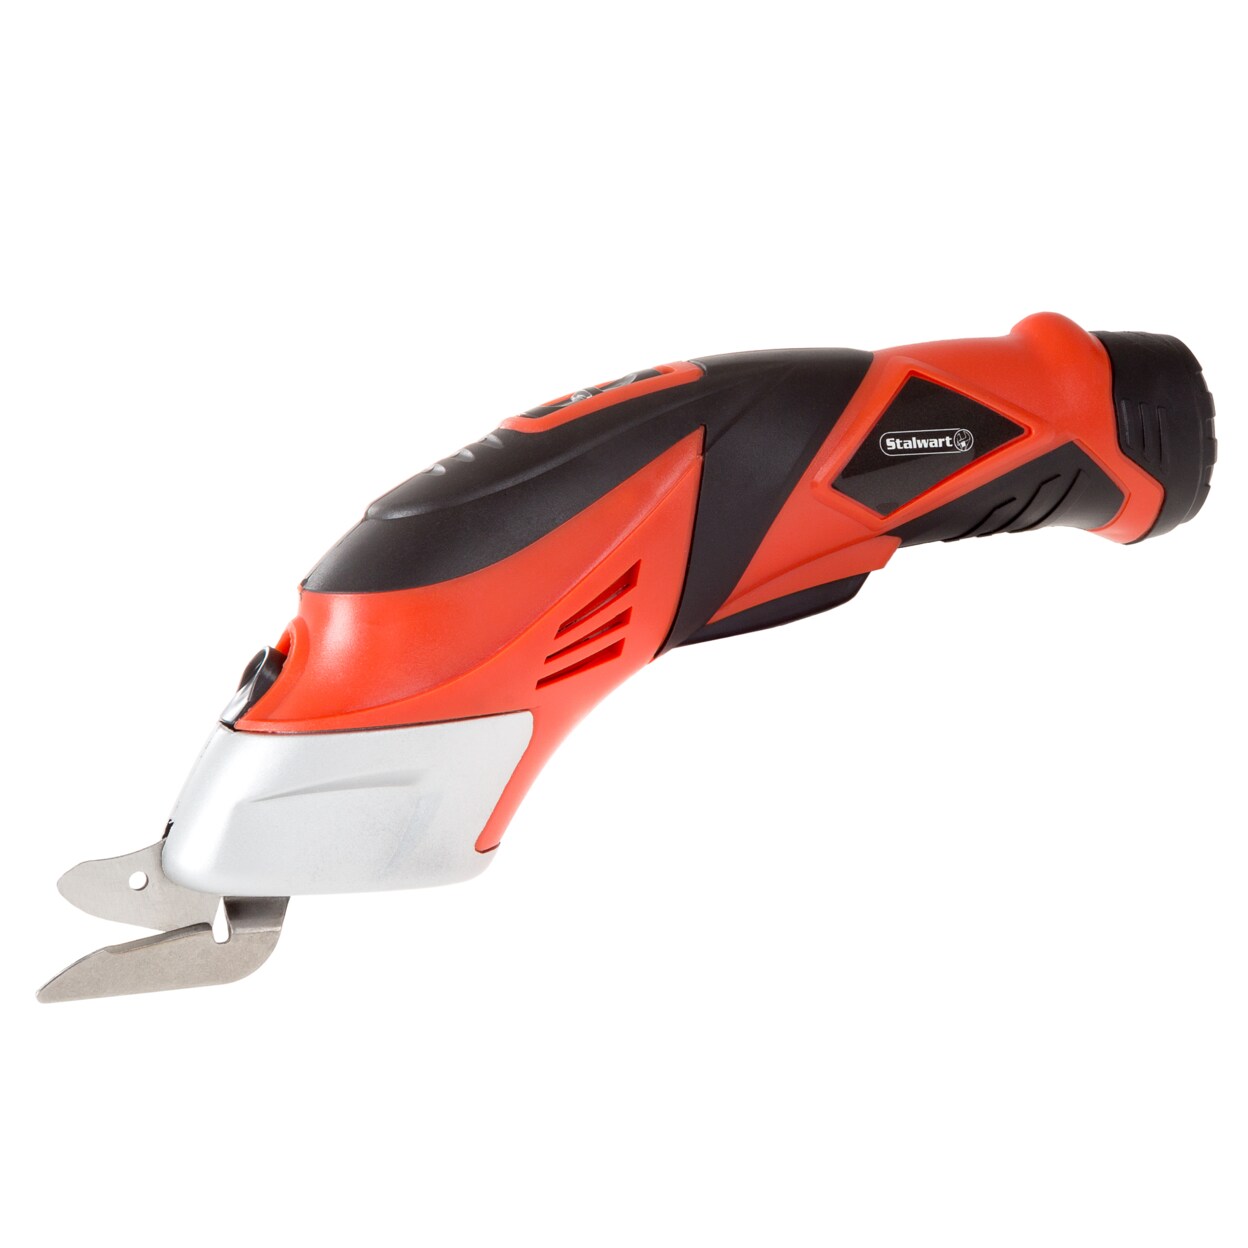 Stalwart Cordless Power Scissors With Two Blades - Fabric, Leather, Carpet  and Cardboard Cutter- 3.6V NiCad Lithium Ion